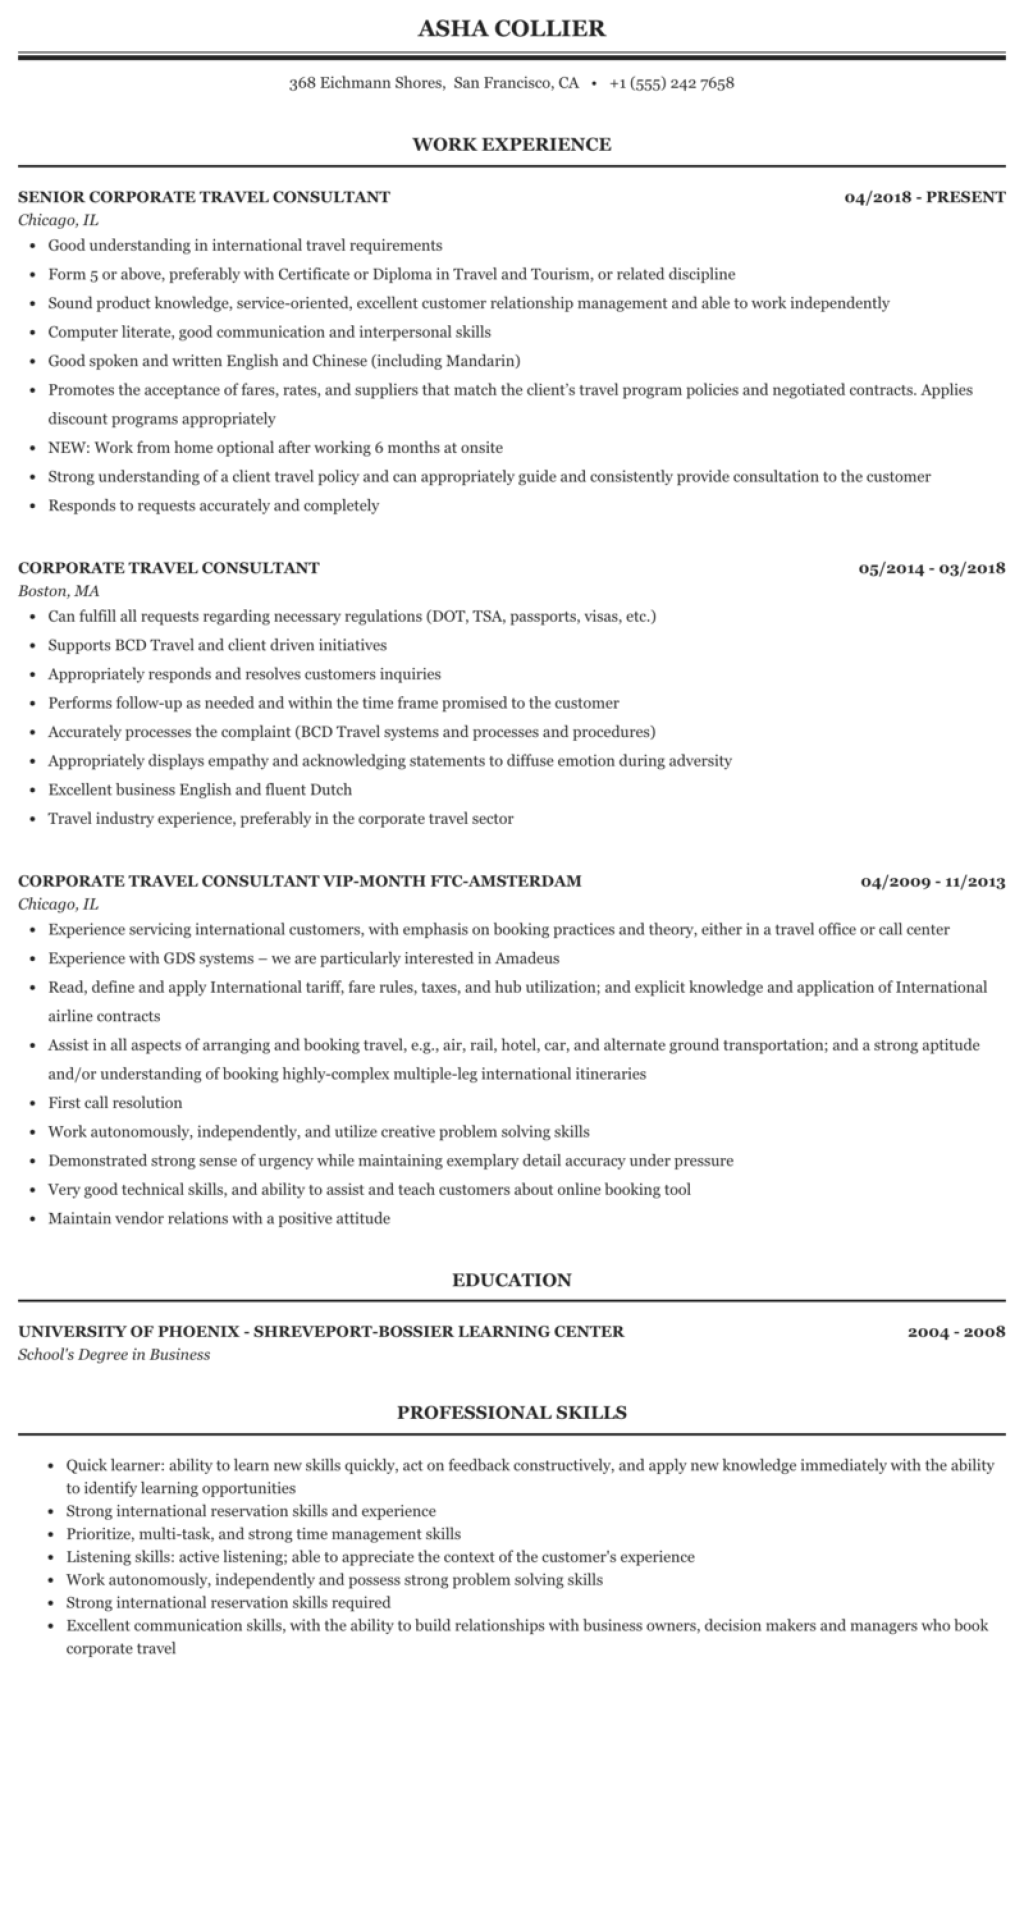 Picture of: Corporate Travel Consultant Resume Sample  MintResume